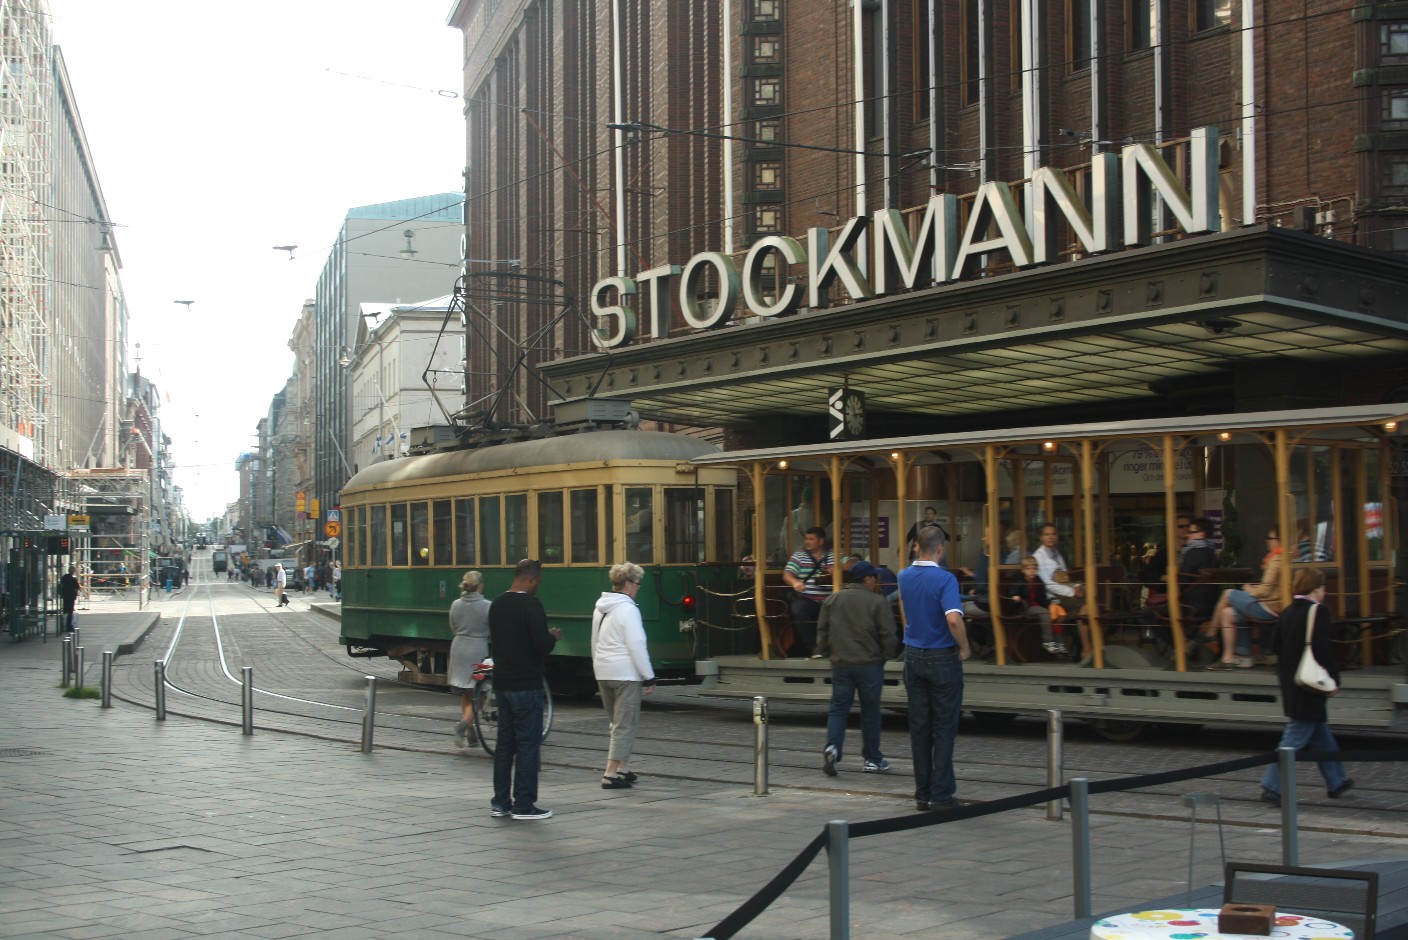 Stockmann is Helsinki's oldest department store and also hosts Northern Europe's biggest super-market. 